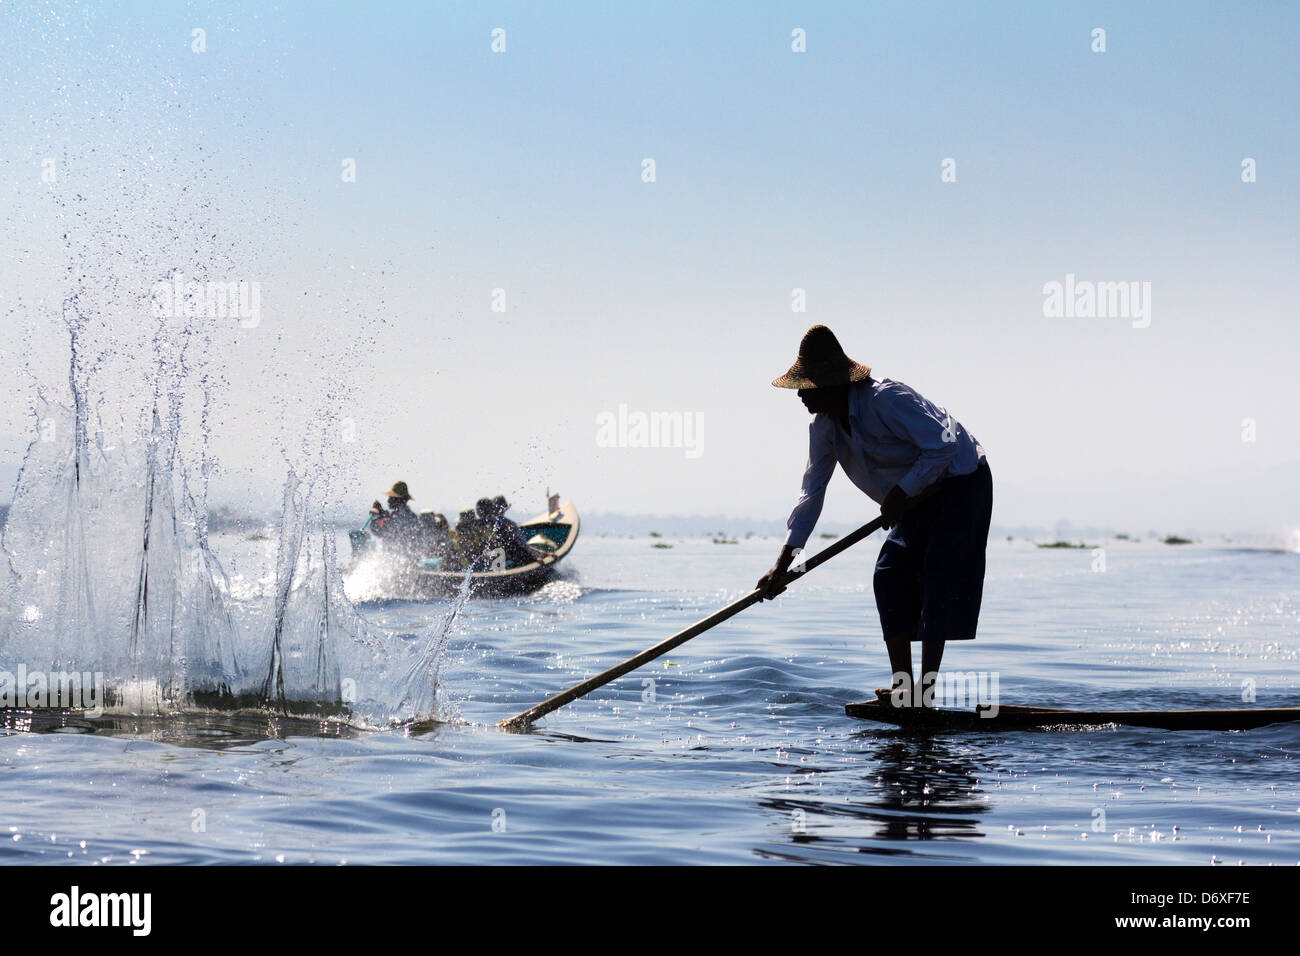 Fisherman beating the water to attract fish on Lake Inle, Myanmar 7 Stock Photo